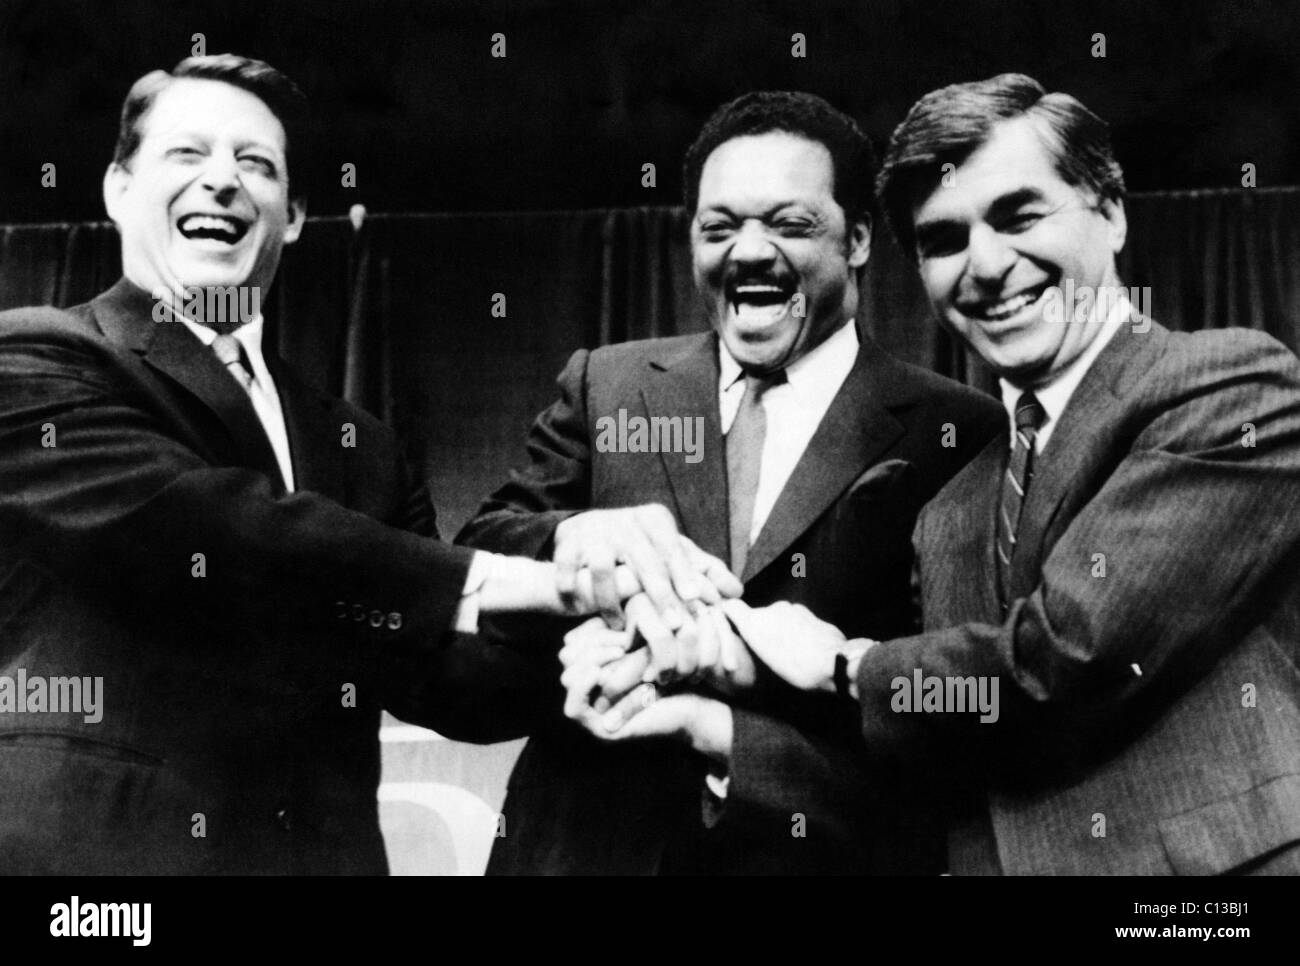 US Elections. From left: US Senator (and future Vice President) Al Gore, Reverend Jesse Jackson, Massachusetts Governor (and future Democratic party presidential nominee) Michael Dukakis before Democratic party presidential debate, Madison Square Garden, New York City, New York, 1988. Stock Photo